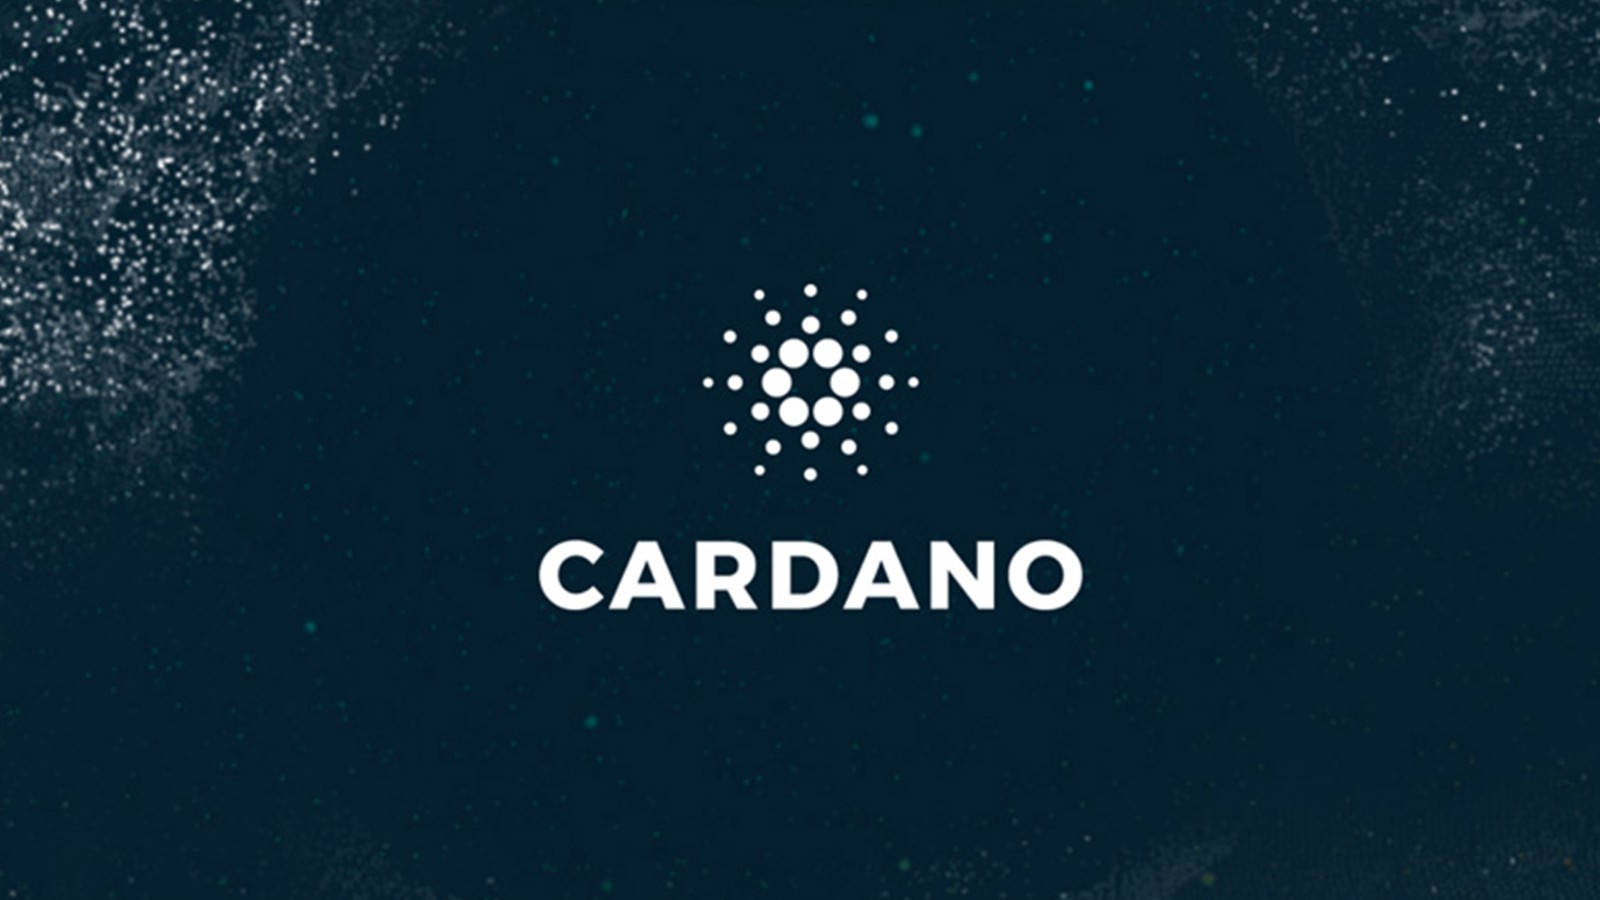 Cardano (ADA) Showcasing Good Numbers Following Weiss Ratings Recommendation